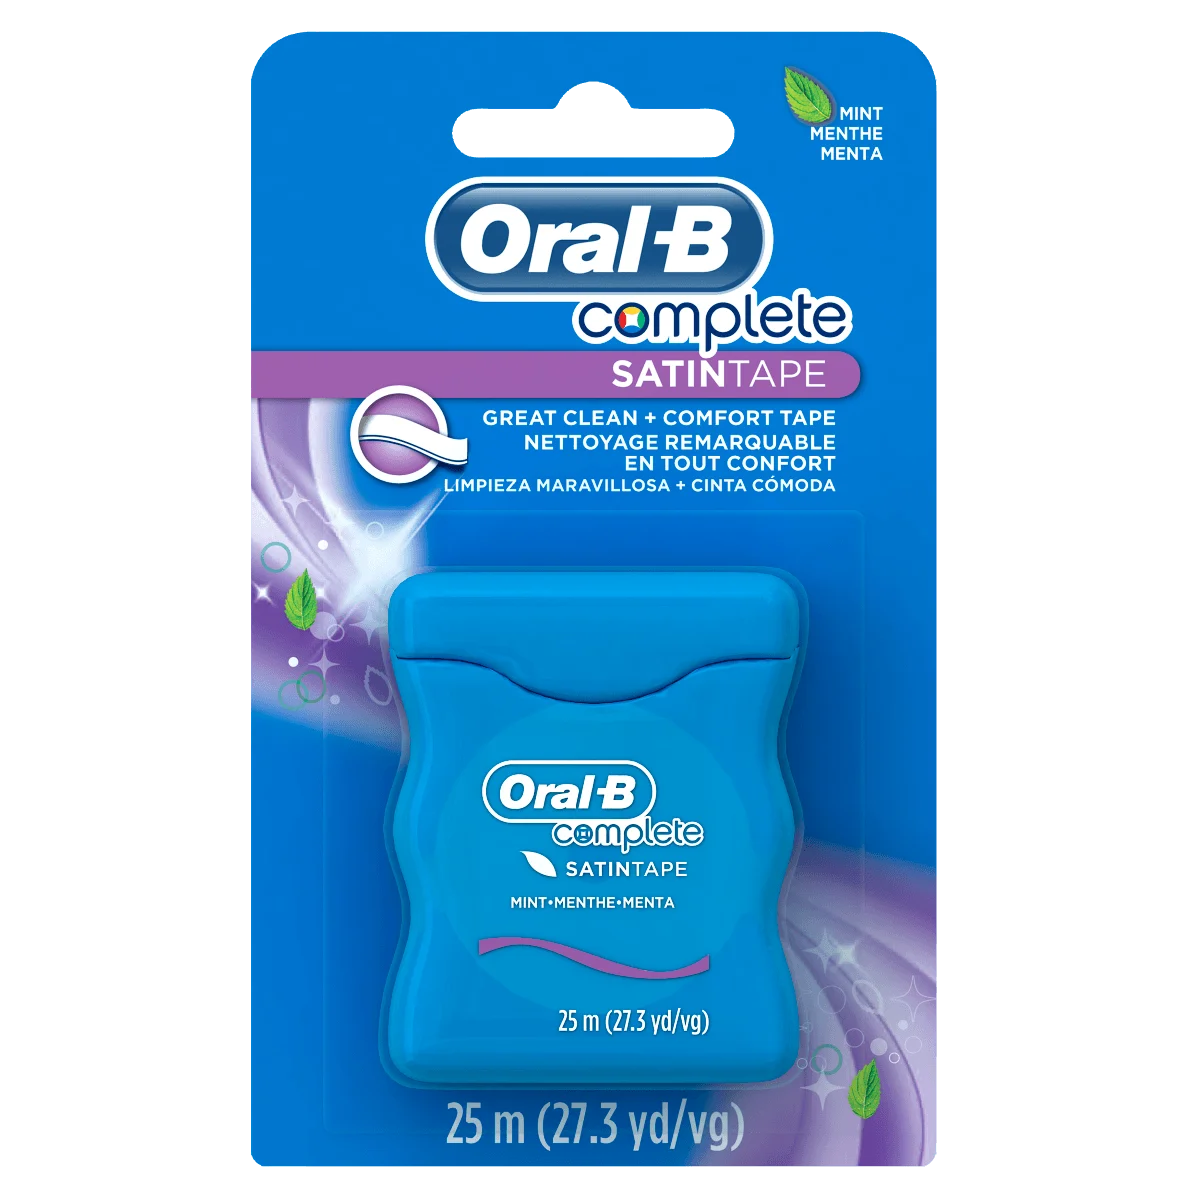 Oral-B Complete Satin Tape undefined